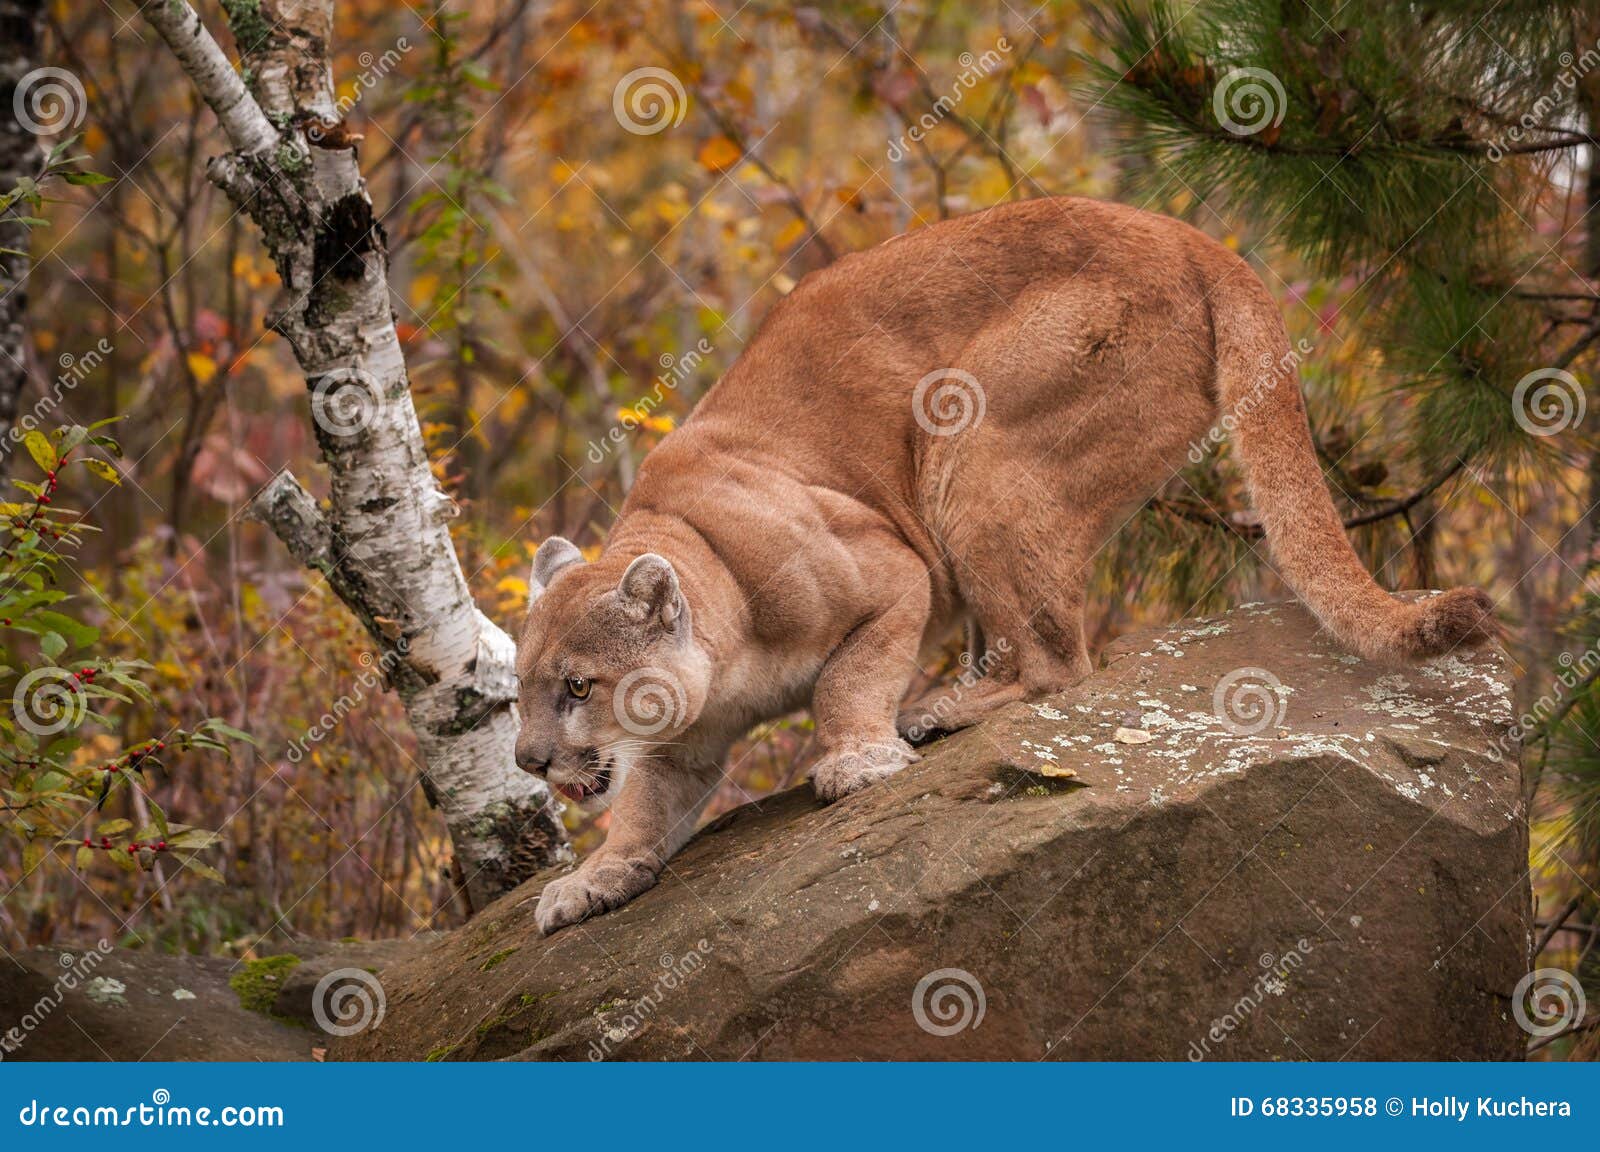 adult male cougar (puma concolor) crouches on rock